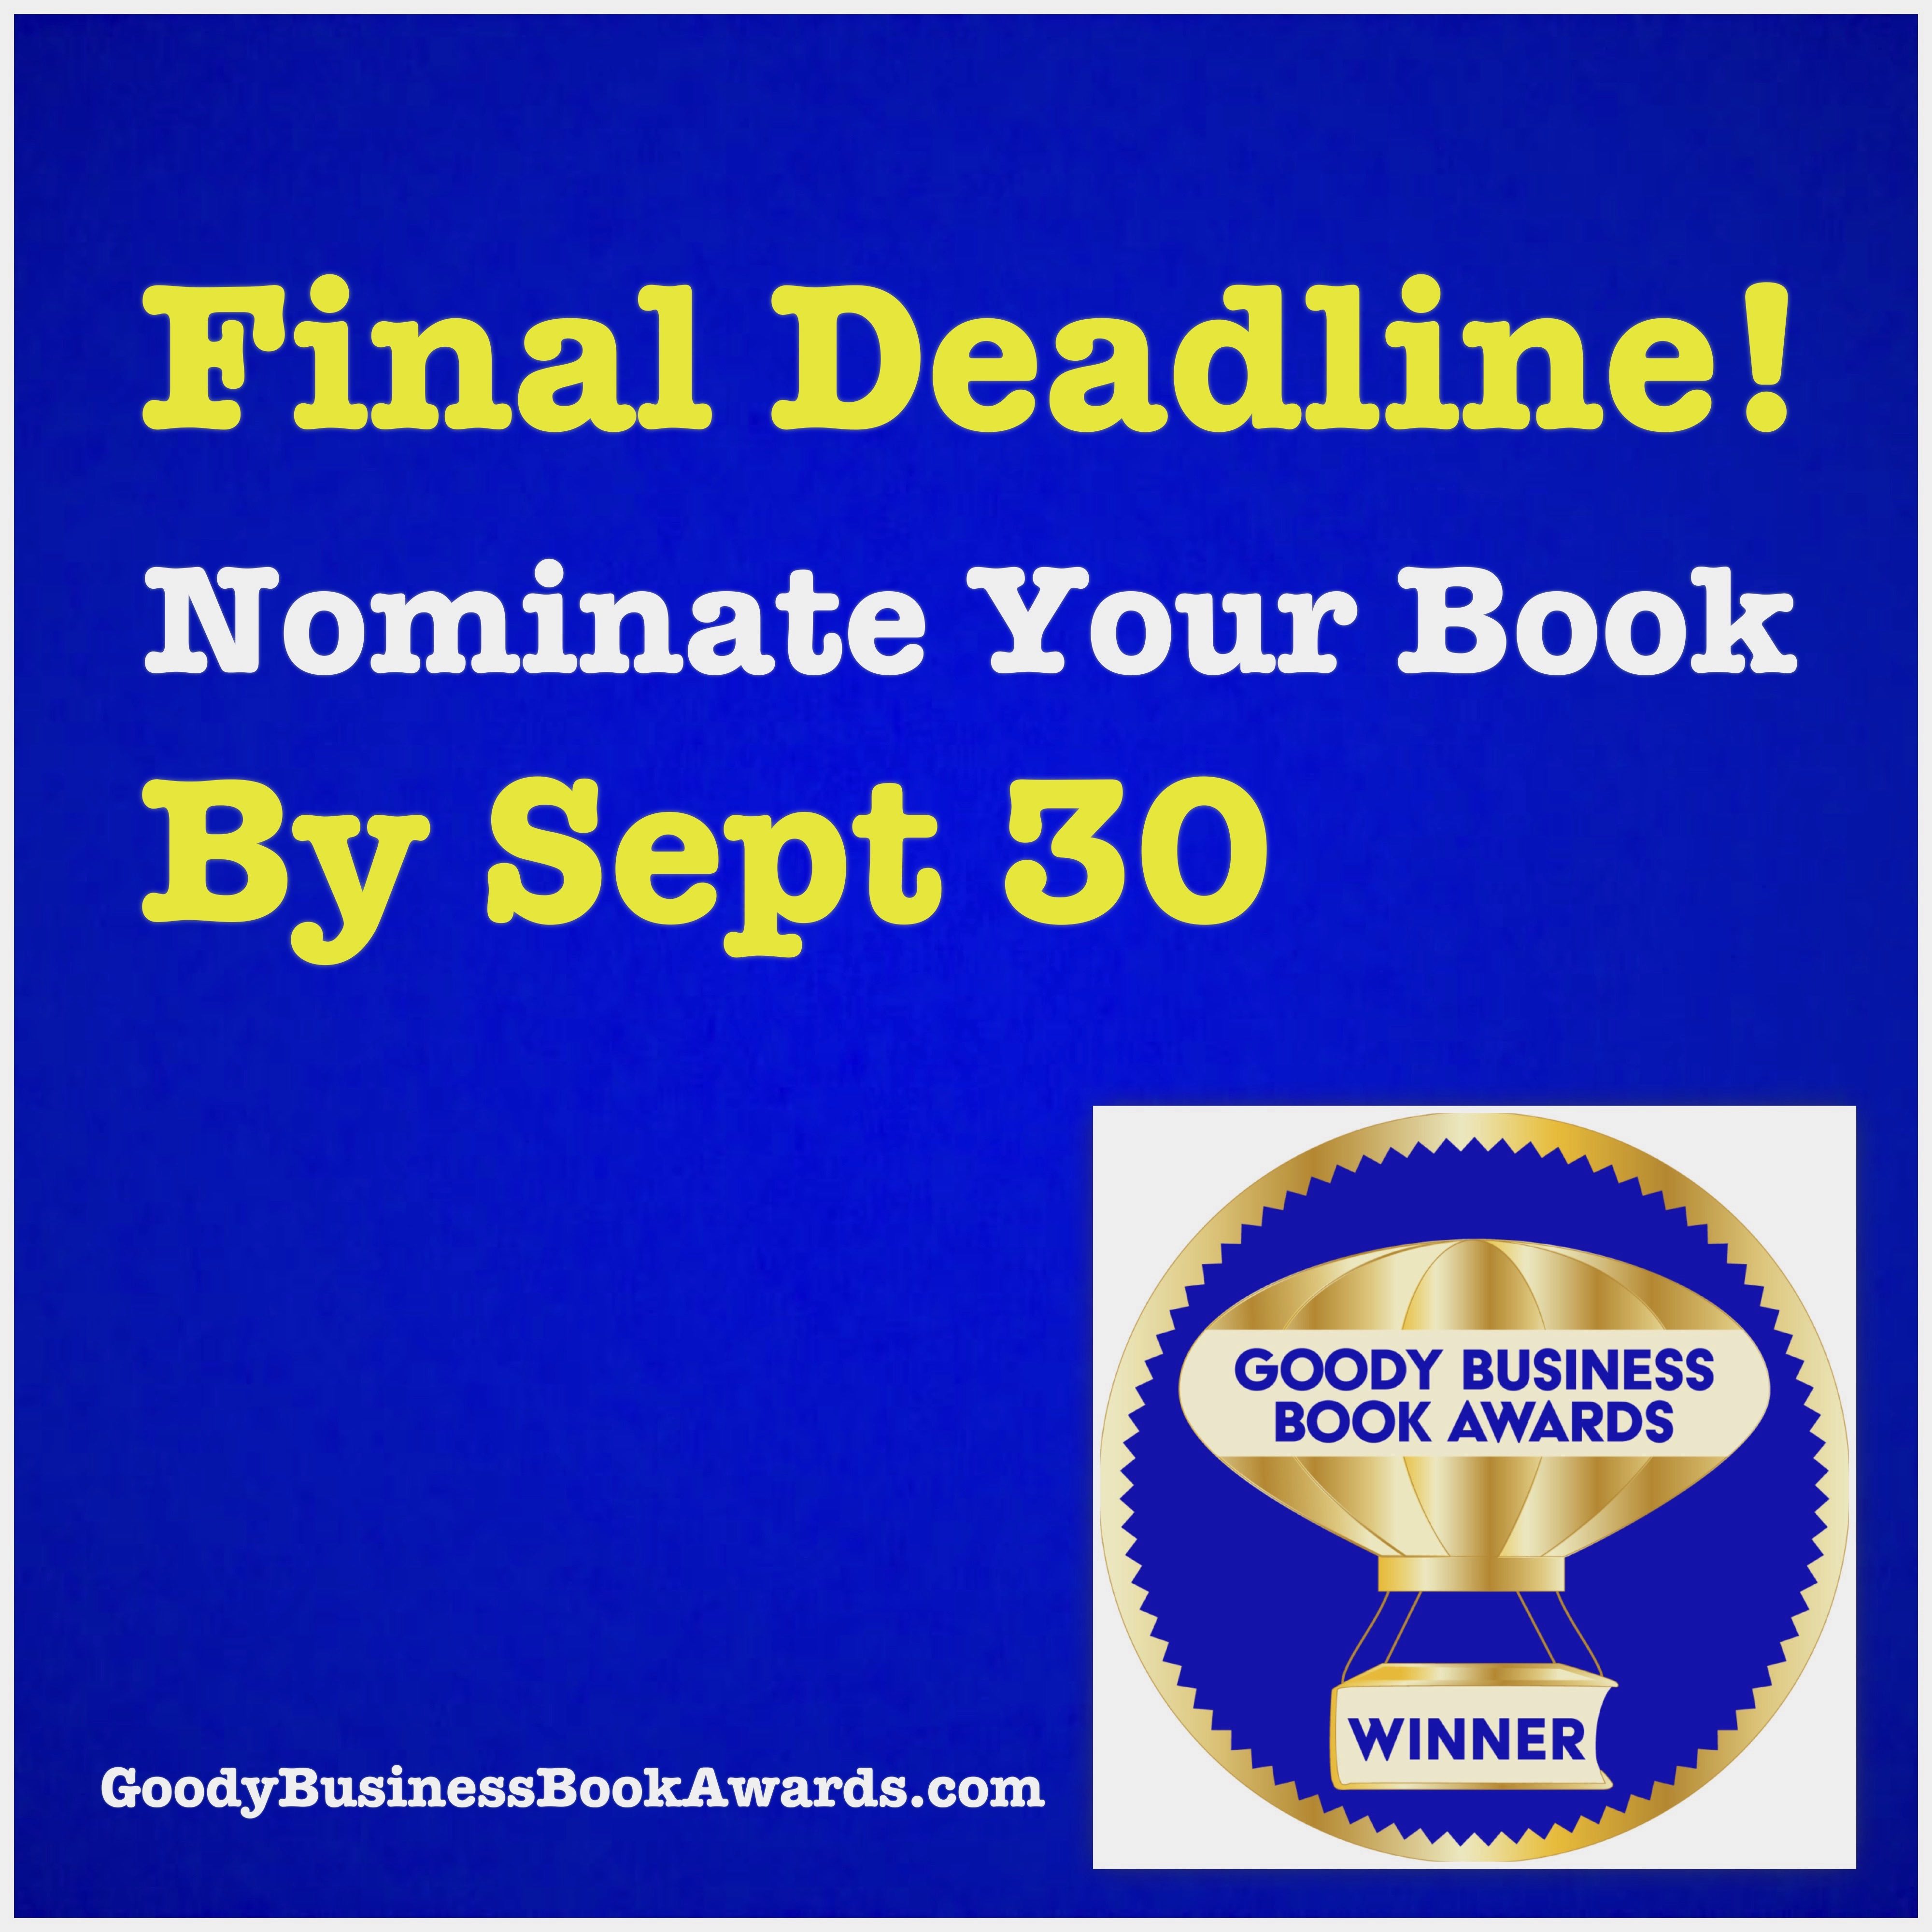 Goody Business Book Awards Final Deadline for authors to nominate books is September 30